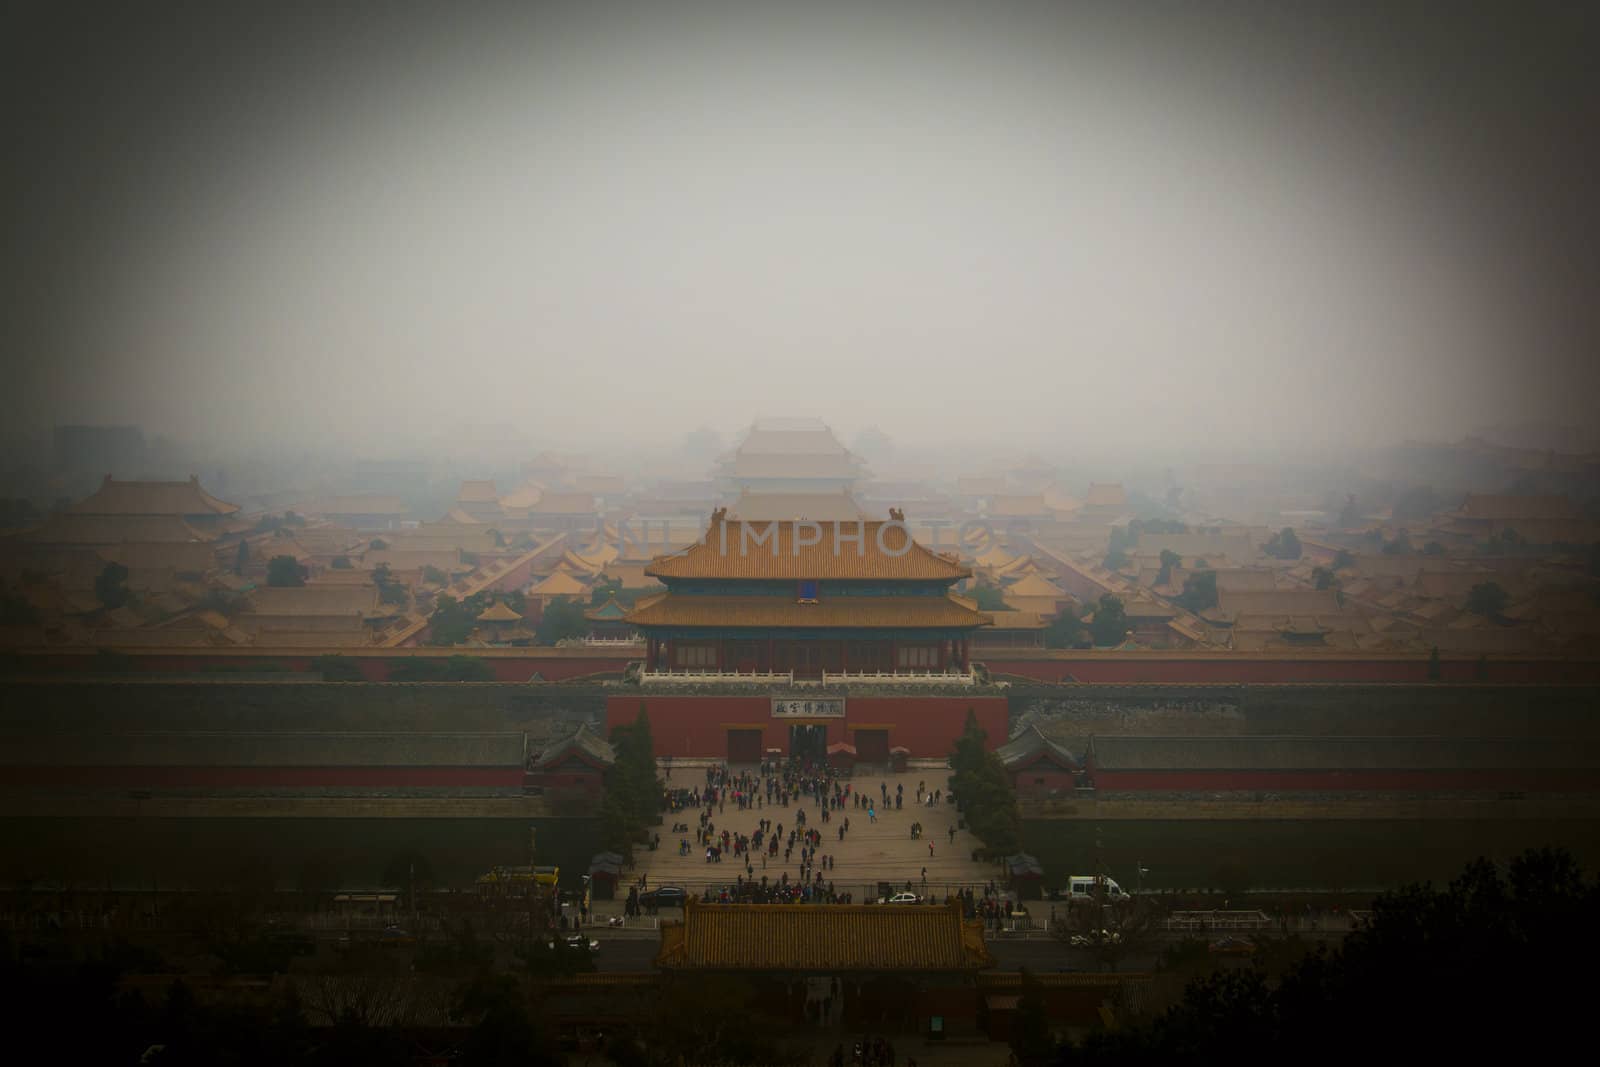 Badly polluted Beijing city with theForbidden city in background.